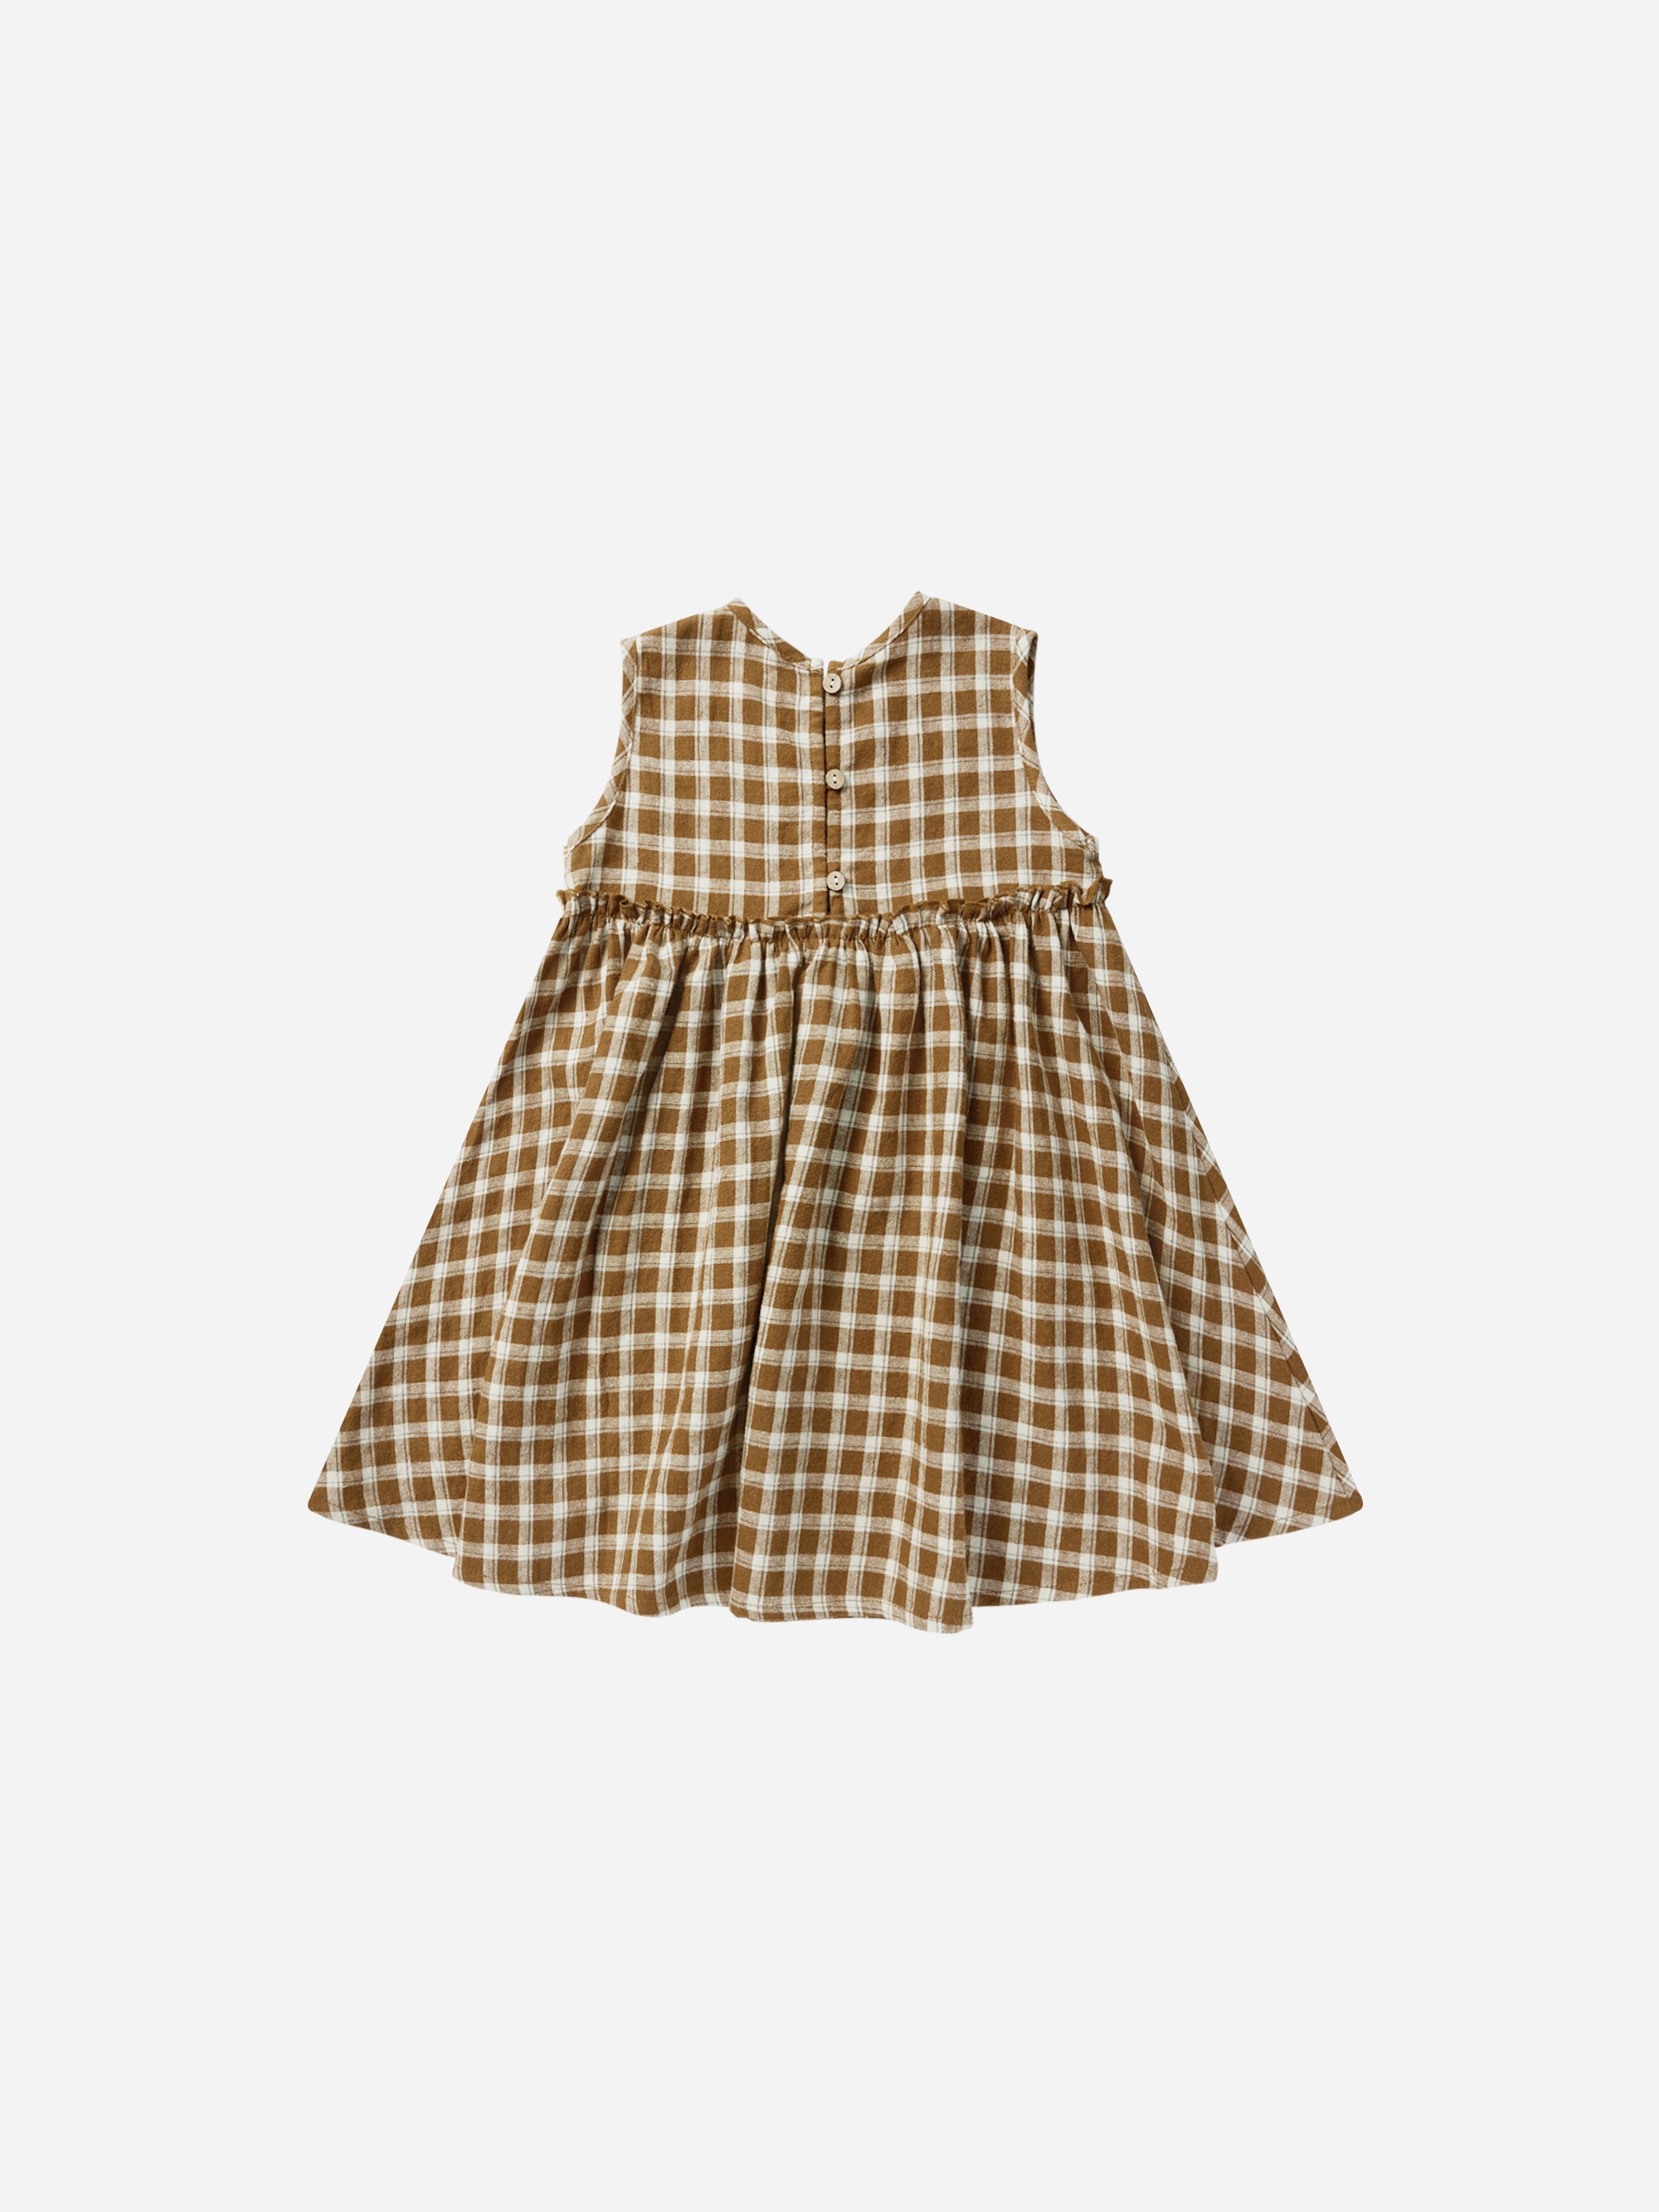 Harper Dress || Saddle Plaid - Rylee + Cru | Kids Clothes | Trendy Baby Clothes | Modern Infant Outfits |